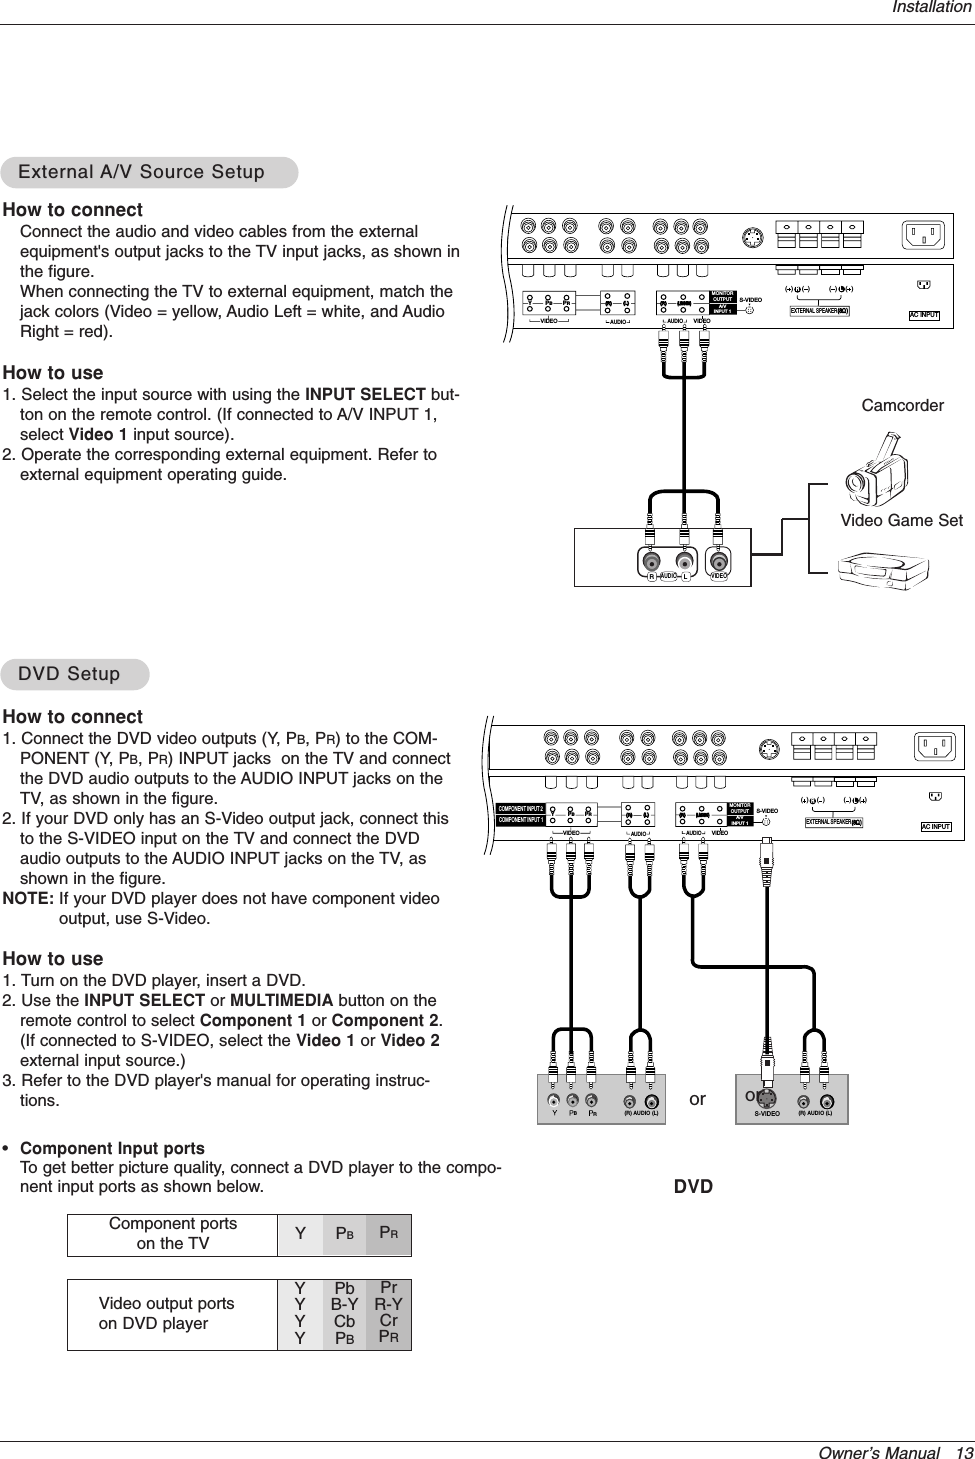 Owner’s Manual   13Installation•Component Input portsTo get better picture quality, connect a DVD player to the compo-nent input ports as shown below.How to connectConnect the audio and video cables from the externalequipment&apos;s output jacks to the TV input jacks, as shown inthe figure. When connecting the TV to external equipment, match thejack colors (Video = yellow, Audio Left = white, and AudioRight = red).How to use1. Select the input source with using the INPUT SELECT but-ton on the remote control. (If connected to A/V INPUT 1,select Video 1 input source).2. Operate the corresponding external equipment. Refer toexternal equipment operating guide.Component ports on the TV Y PBPRVideo output ports on DVD playerYYYYPbB-YCbPBPrR-YCrPRHow to connect1. Connect the DVD video outputs (Y, PB, PR) to the COM-PONENT (Y, PB, PR) INPUT jacks  on the TV and connectthe DVD audio outputs to the AUDIO INPUT jacks on theTV, as shown in the figure.2. If your DVD only has an S-Video output jack, connect thisto the S-VIDEO input on the TV and connect the DVDaudio outputs to the AUDIO INPUT jacks on the TV, asshown in the figure.NOTE: If your DVD player does not have component videooutput, use S-Video.How to use1. Turn on the DVD player, insert a DVD.2. Use the INPUT SELECT or MULTIMEDIA button on theremote control to select Component 1 or Component 2.(If connected to S-VIDEO, select the Video 1 or Video 2external input source.)3. Refer to the DVD player&apos;s manual for operating instruc-tions.External External A/V Source SetupA/V Source SetupDVD SetupDVD SetupRLAUDIO VIDEOYPBPRAC INPUT(  )(  )(  )(  )EXTERNAL SPEAKERS-VIDEOAUDIOVIDEOMONITOROUTPUTA/VINPUT 1(R)(R) (L)(L)VIDEO(R)(R)(L/MONO)(L/MONO)RLAUDIOBR(R) AUDIO (L) (R) AUDIO (L)S-VIDEOYPBPRAC INPUT(  )(  )(  )(  )EXTERNAL SPEAKERS-VIDEOAUDIOVIDEOMONITOROUTPUTA/VINPUT 1(R) (L)VIDEO(R)(L/MONO)(L/MONO)RLAUDIOCOMPONENT INPUT 2COMPONENT INPUT 1DVDorCamcorderVideo Game Setor